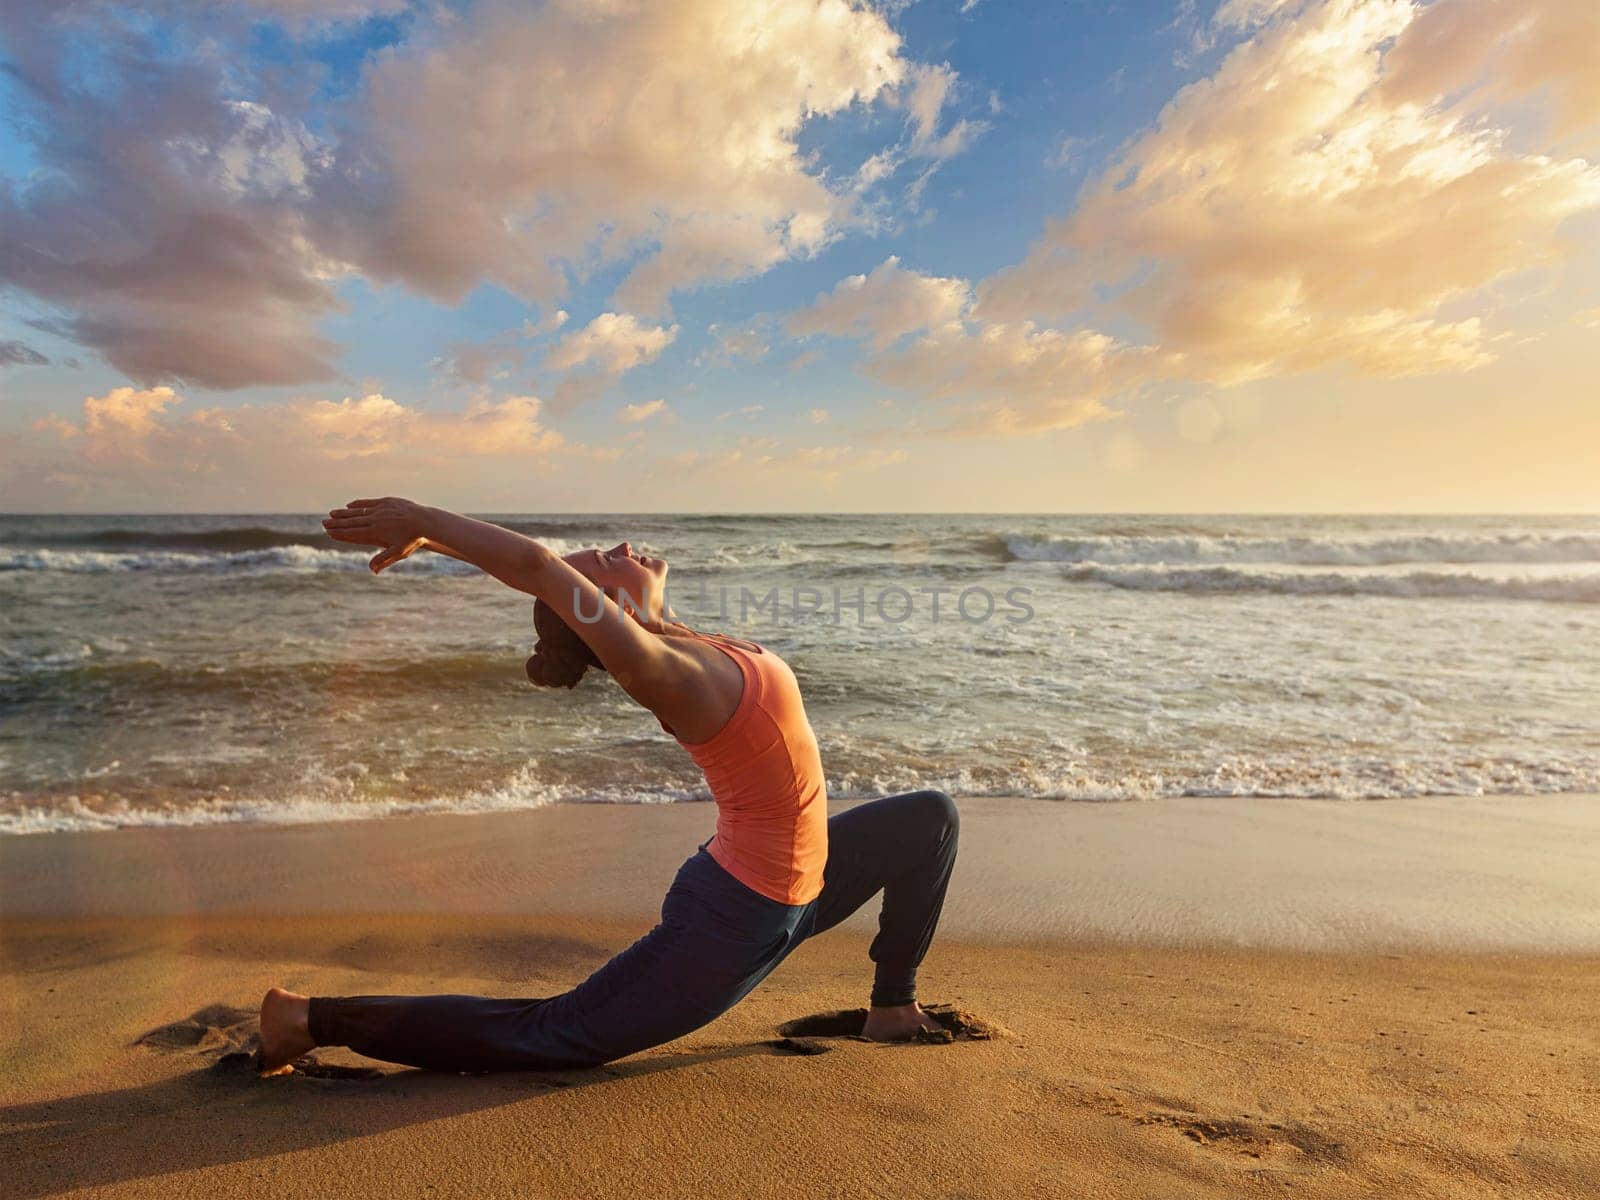 Yoga outdoors - sporty fit woman practices yoga Anjaneyasana - low crescent lunge pose outdoors at beach on sunset